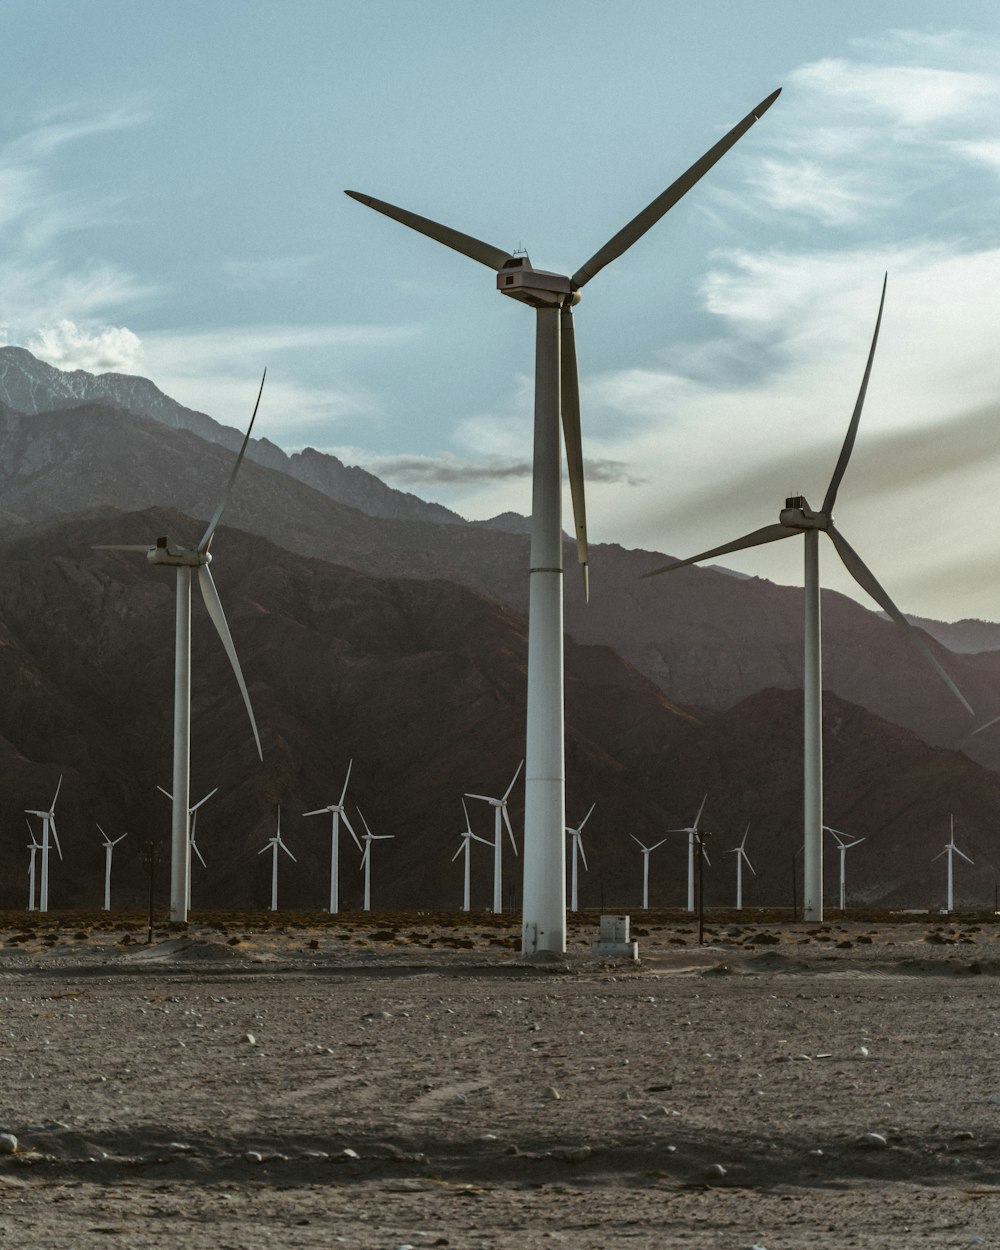 a group of windmills in a desert with mountains in the background